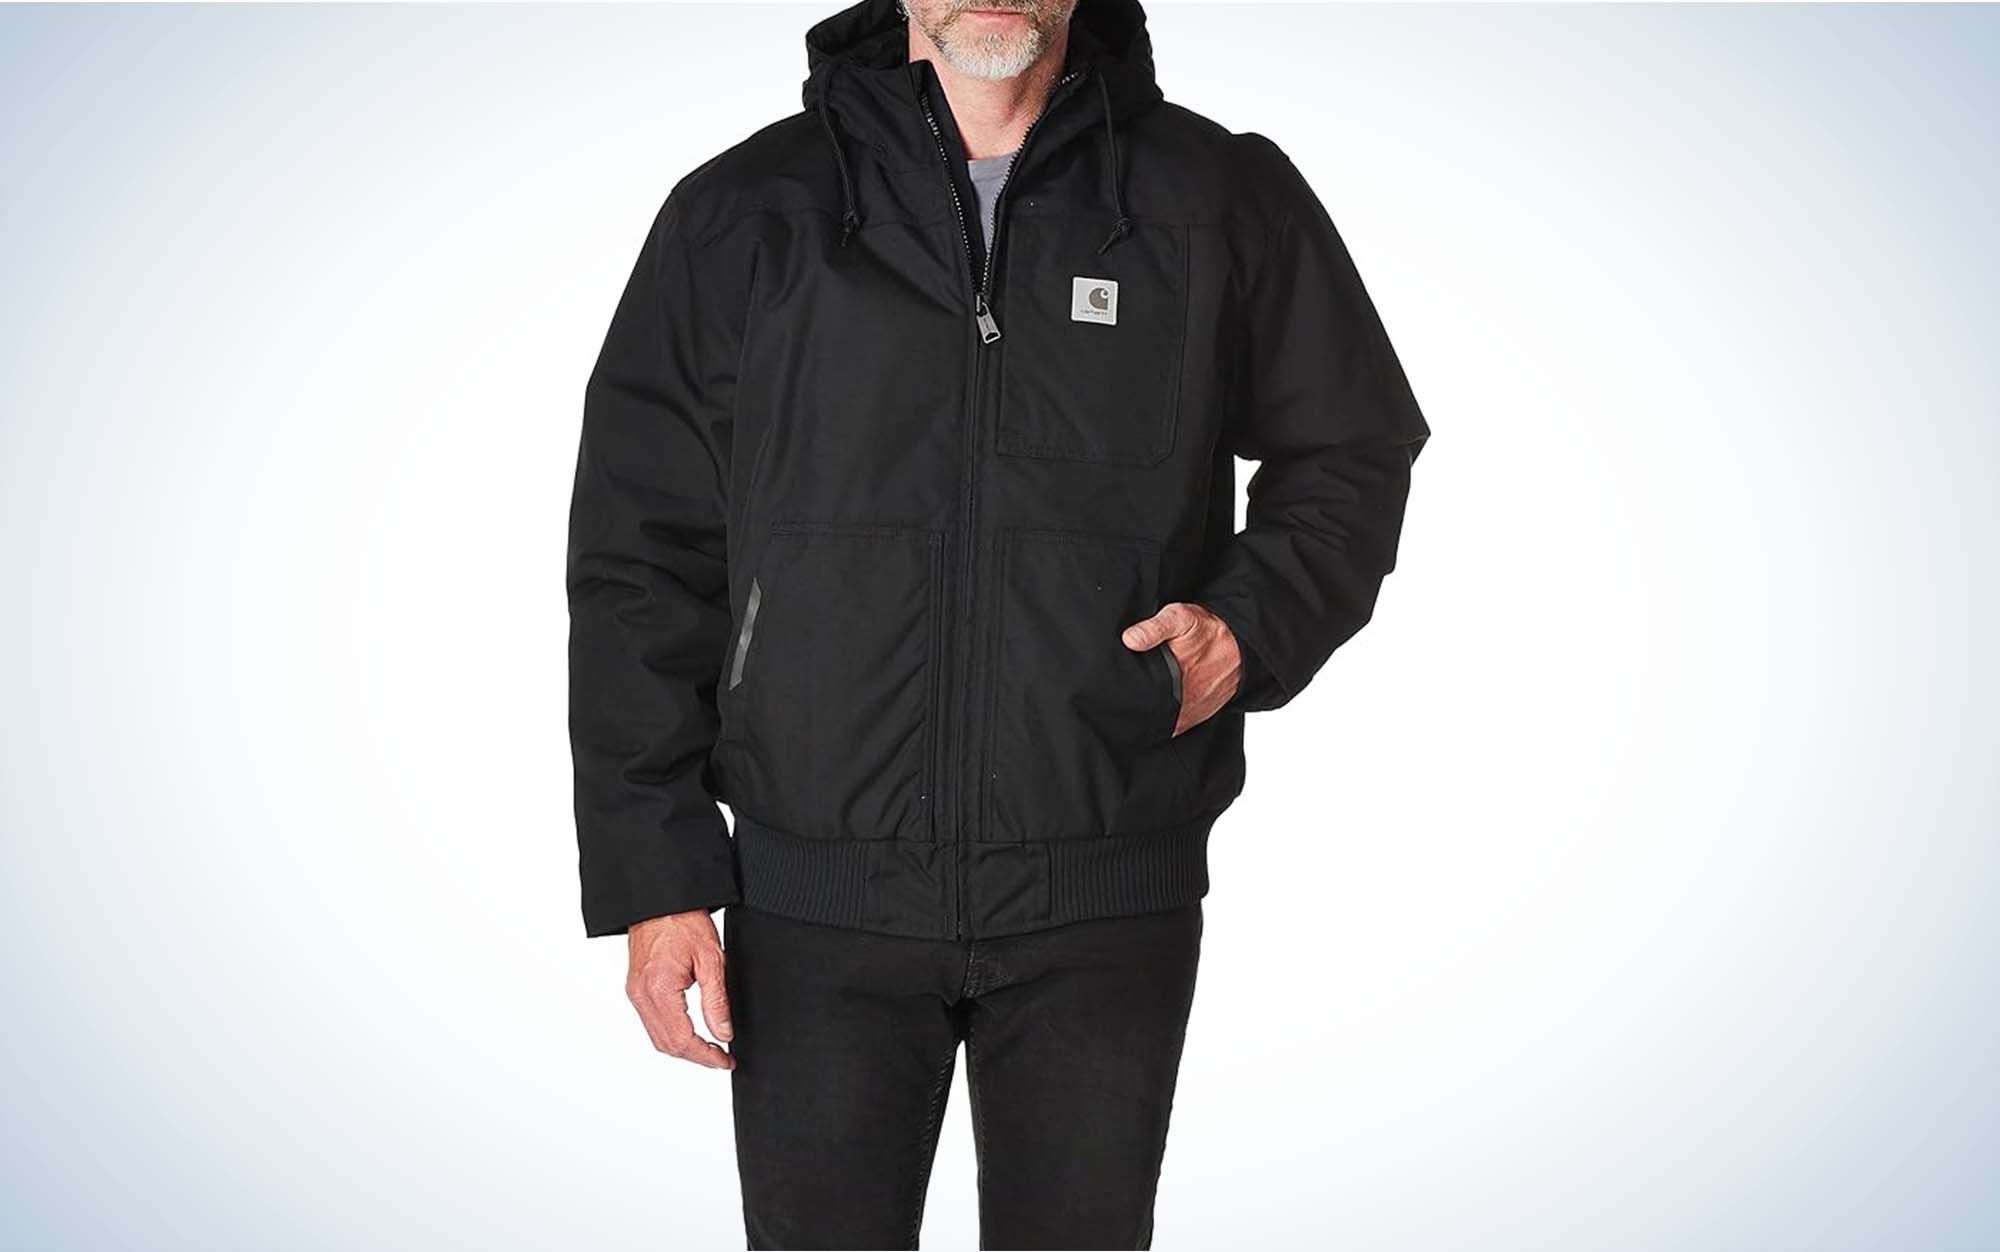 The Best Men's Jackets Spring 2022: Patagonia, North Face, Carharrt